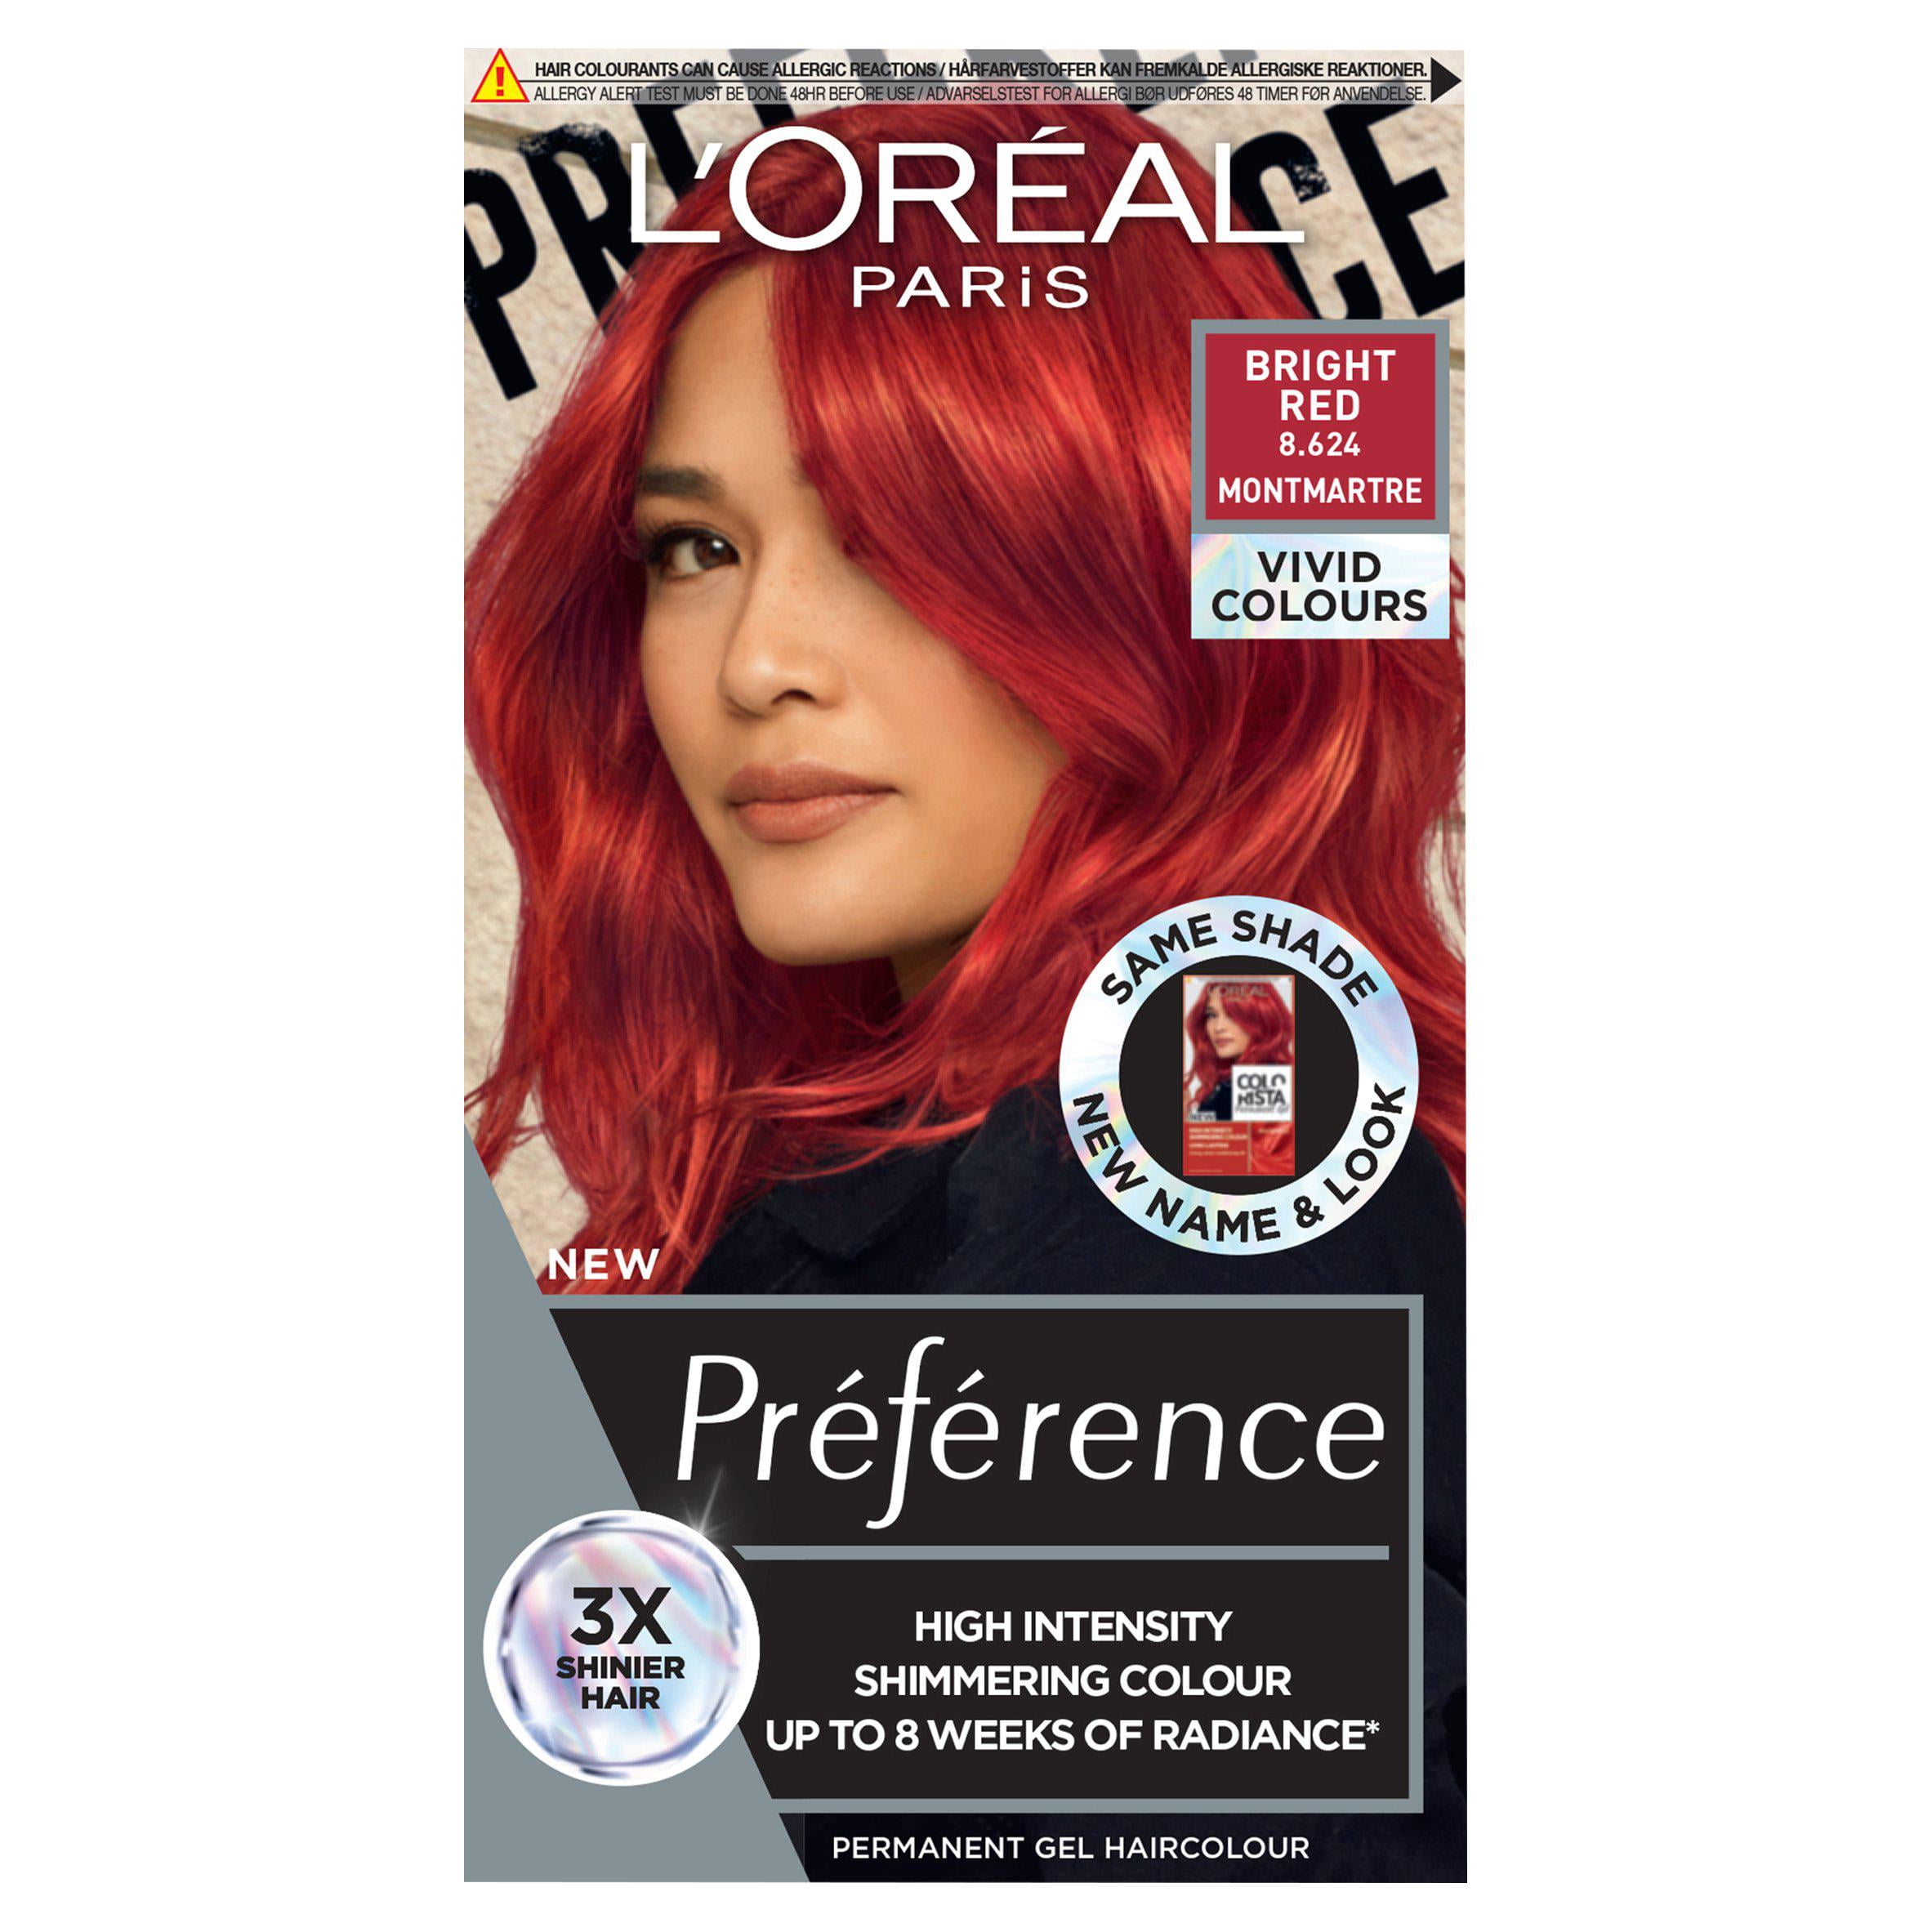 L'Oreal Paris Preference (Colorista) Bright Permanent Gel Dye - Version North American Variety - Imported from United Kingdom by Sentogo - SOLD AS A 2 PACK - Walmart.com